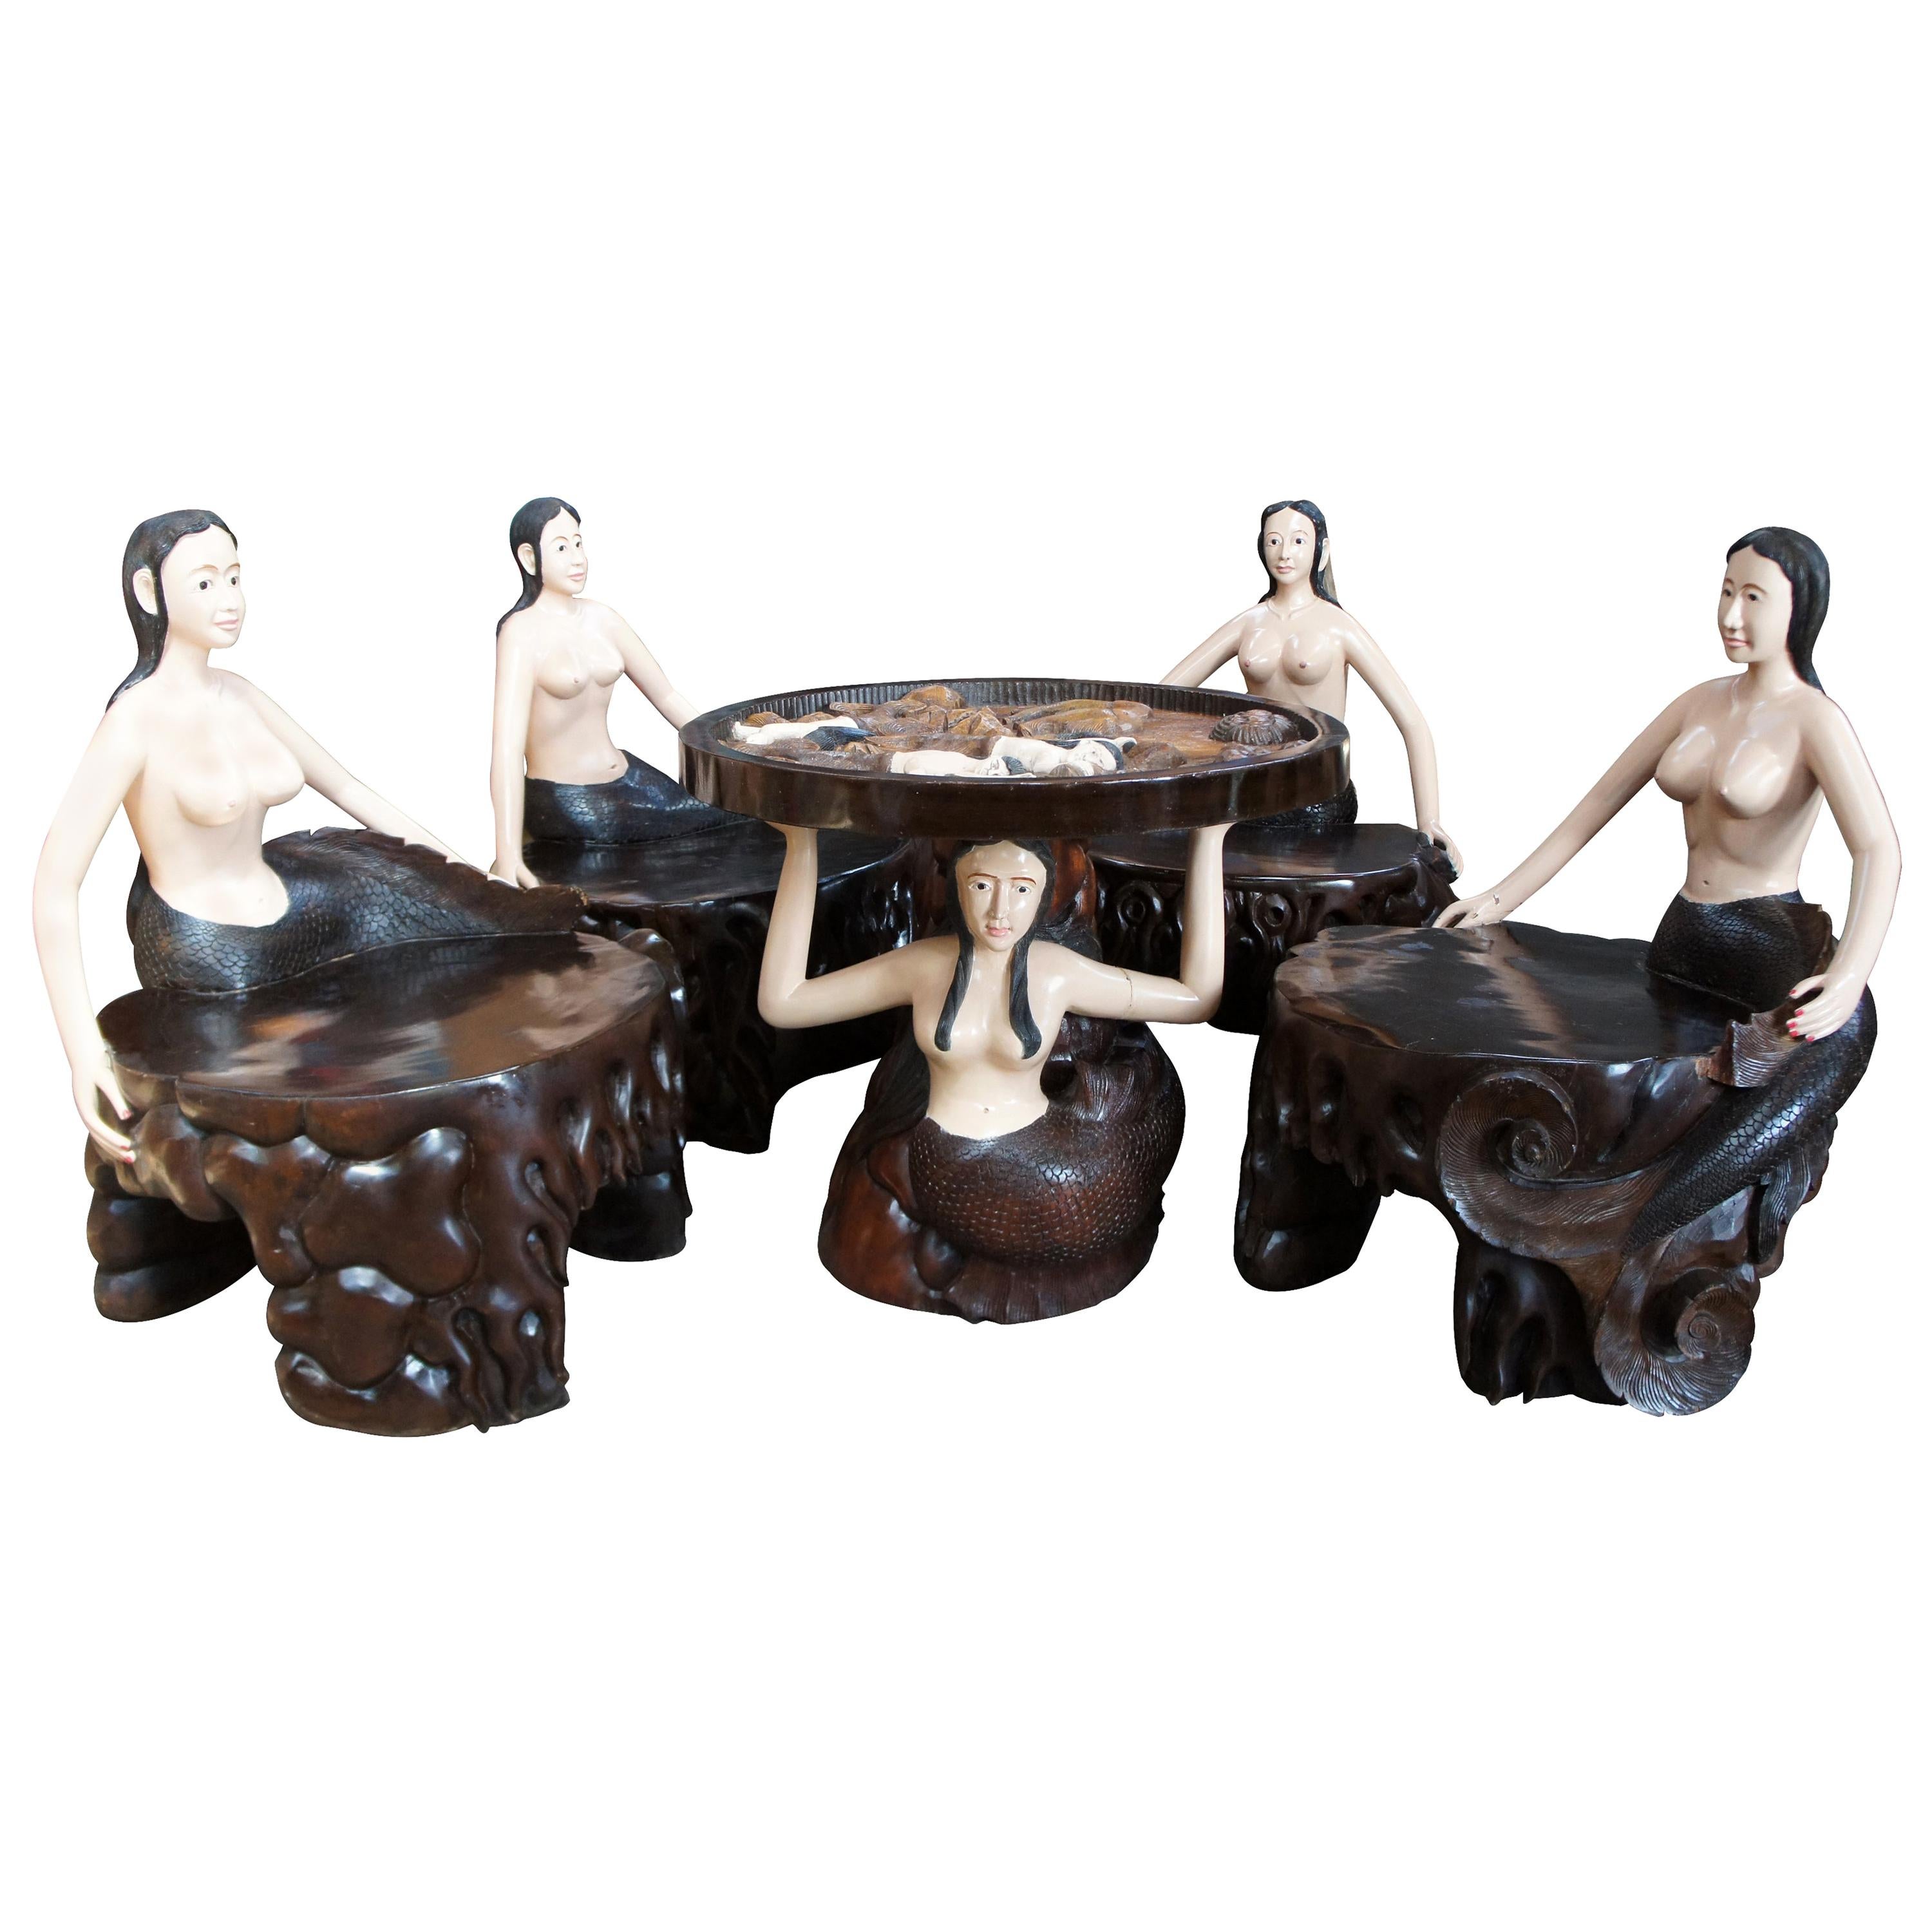 Vintage Carved Nude Figural Mermaid Card Game Table & Chairs Nautical Poker Bali